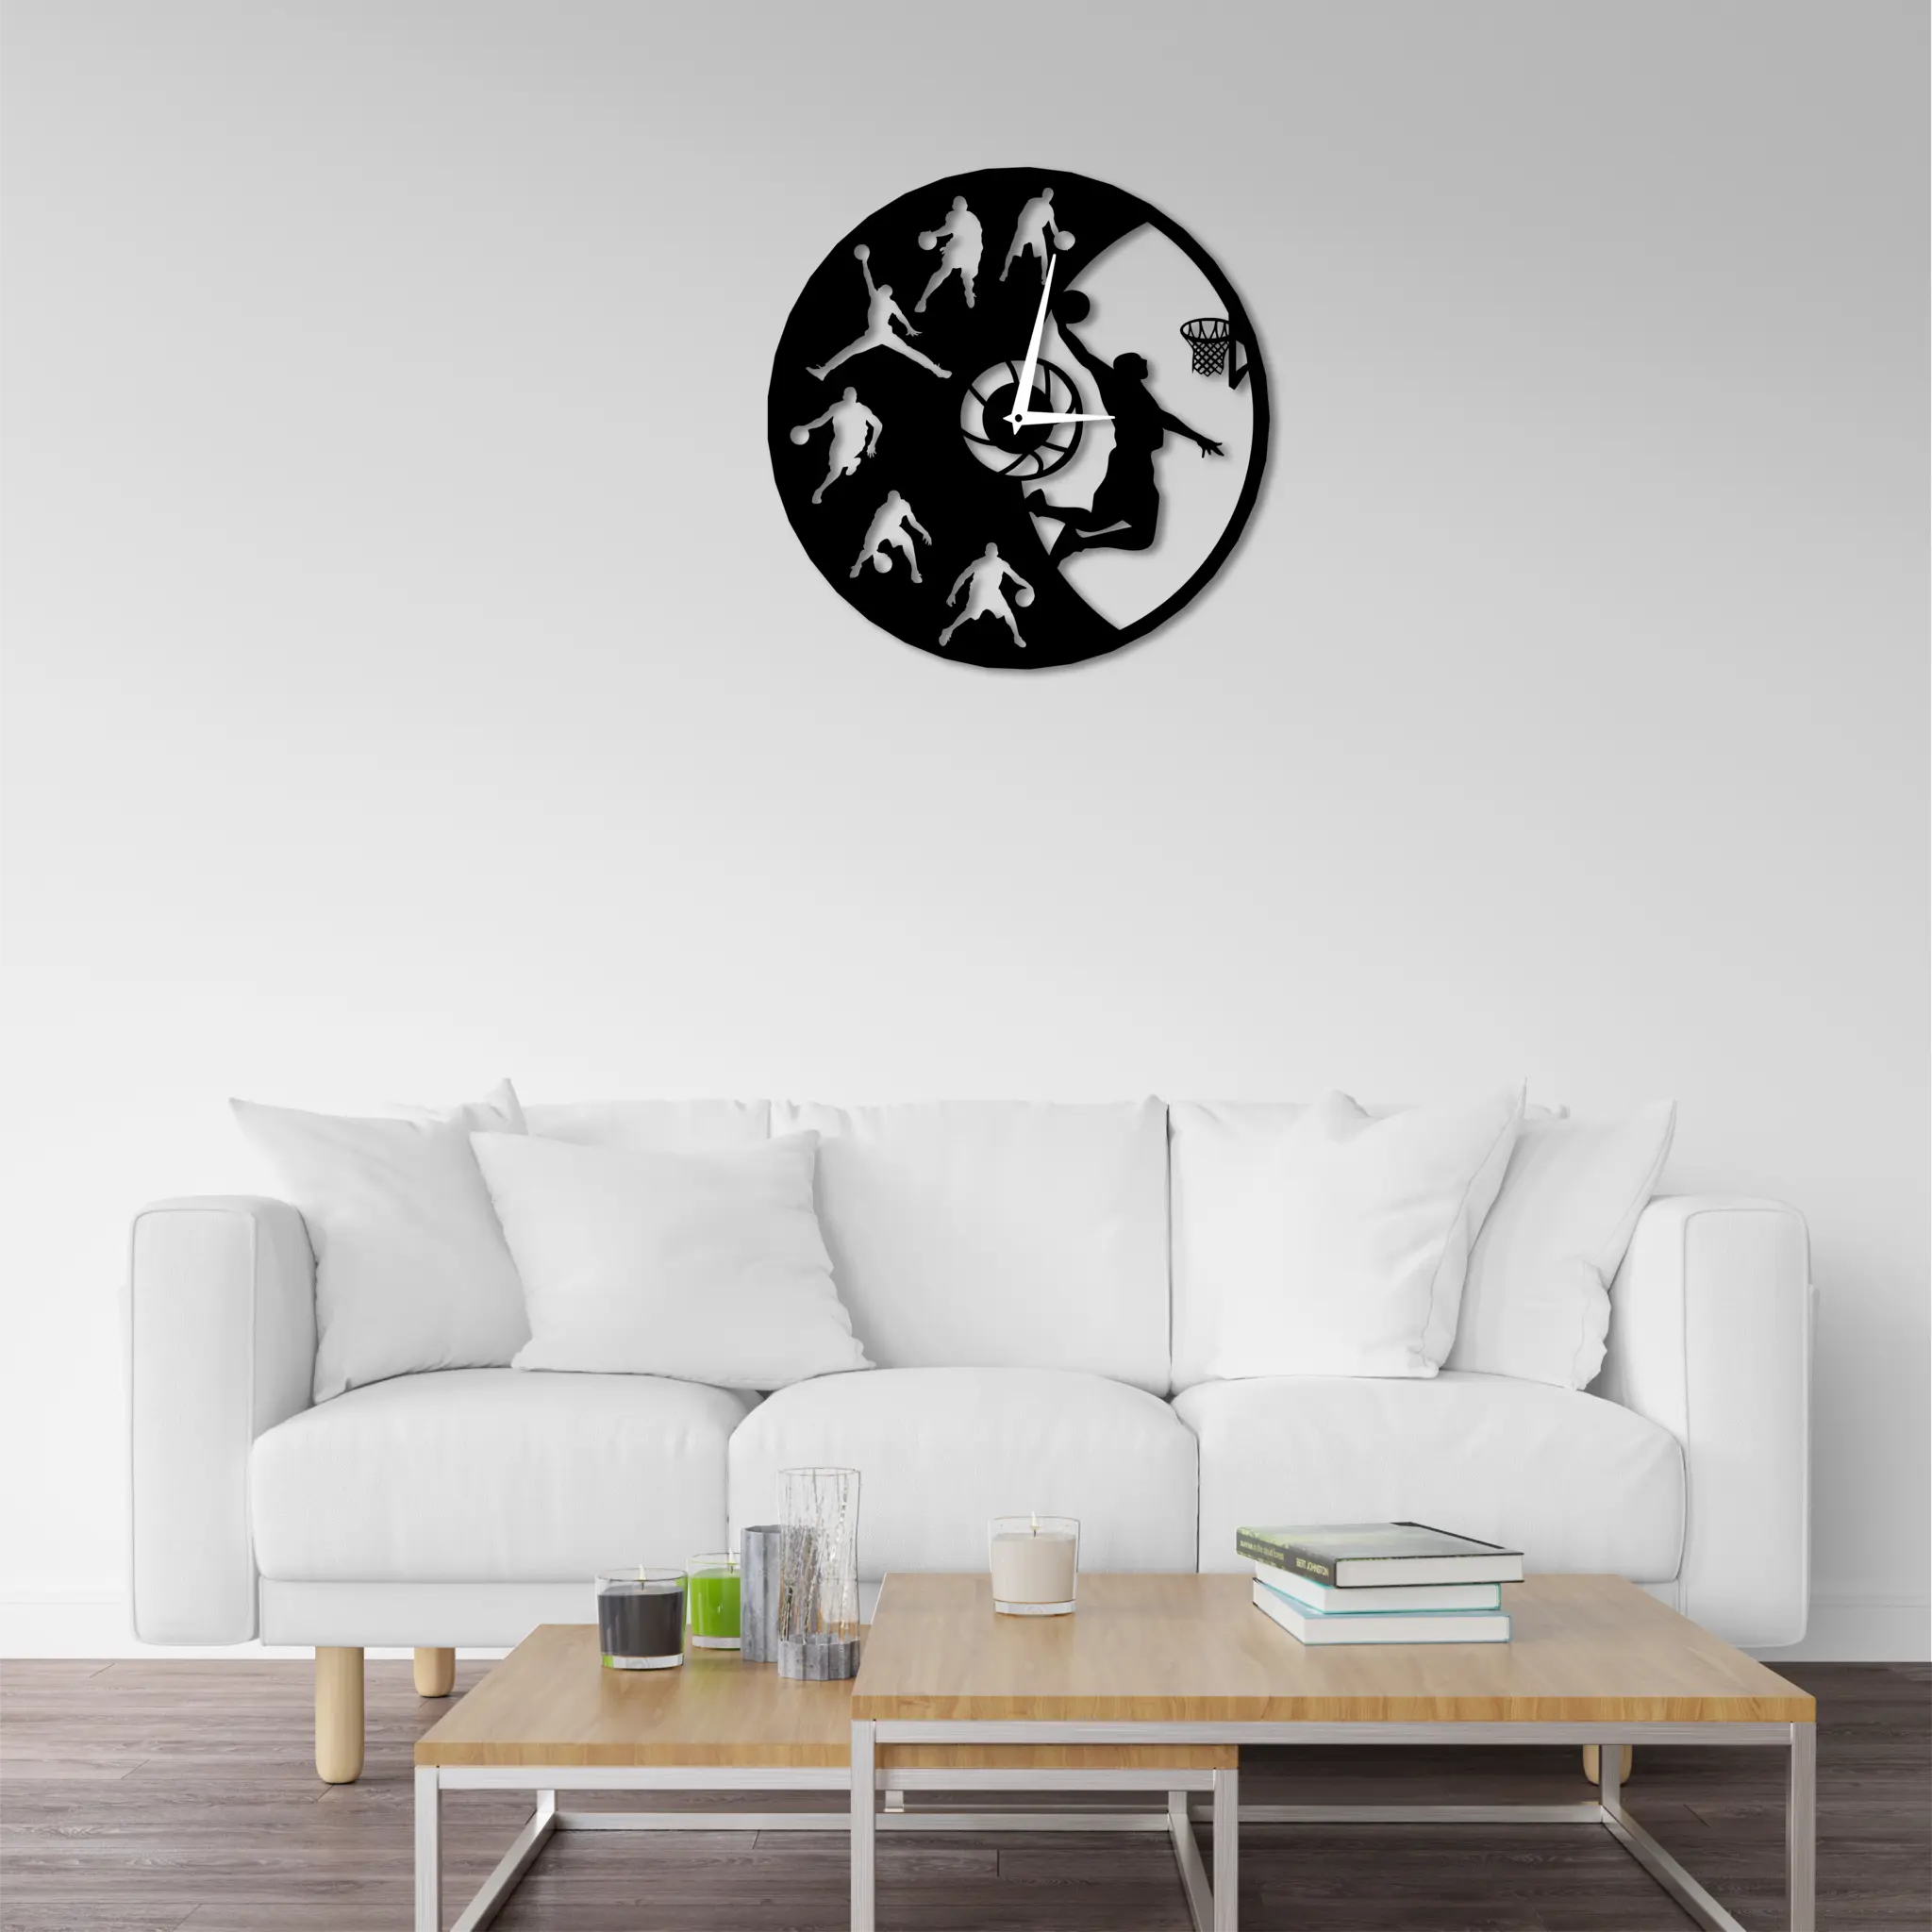 Basketball wall art, a handcrafted Metal l record clock, college room décor for youngsters, motivational wall décor, and the ideal present for sports enthusiasts